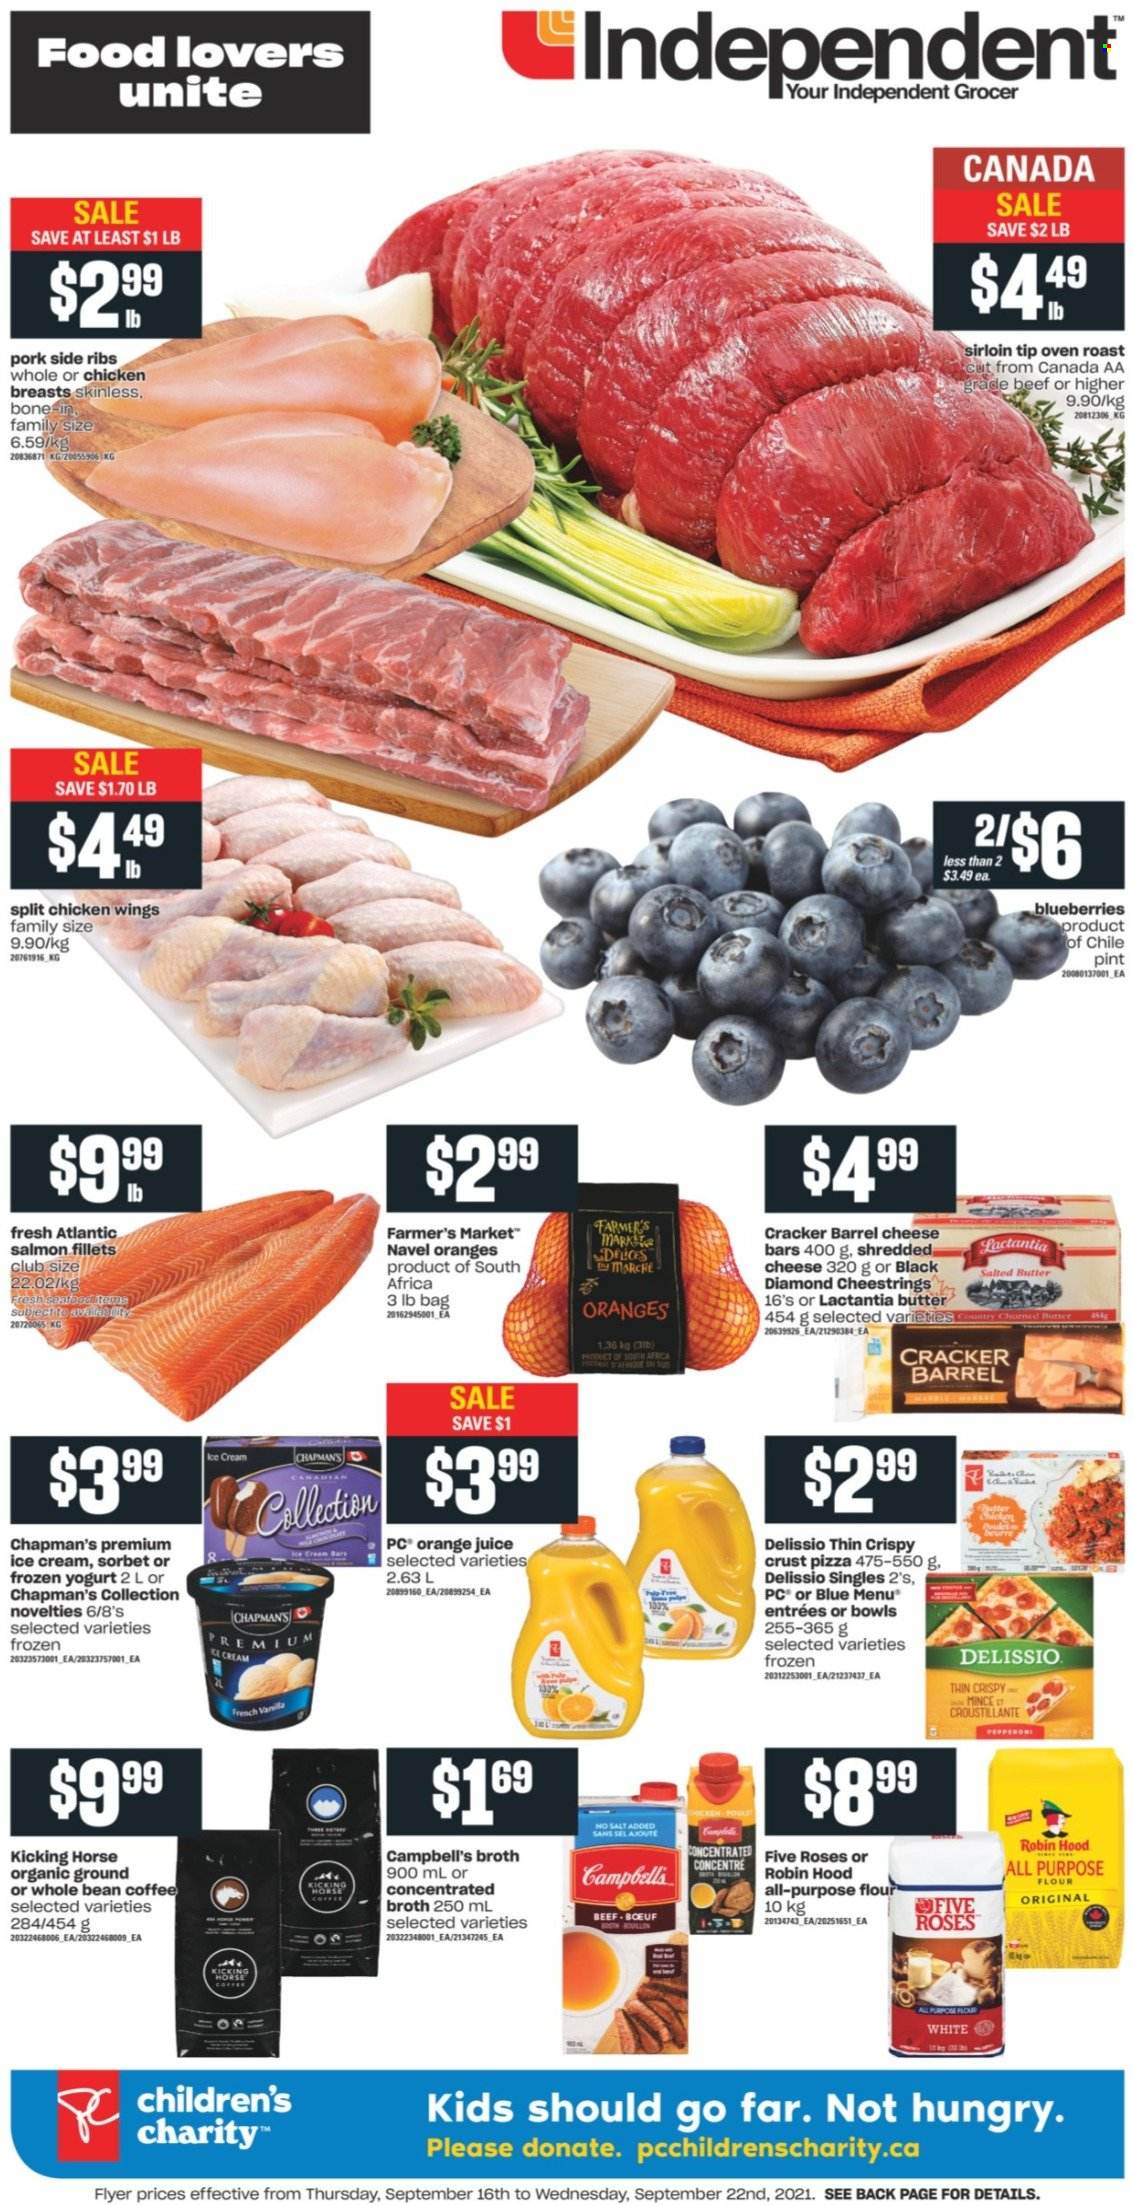 thumbnail - Independent Flyer - September 16, 2021 - September 22, 2021 - Sales products - blueberries, navel oranges, salmon, salmon fillet, Campbell's, pizza, shredded cheese, string cheese, yoghurt, butter, salted butter, ice cream, chicken wings, crackers, flour, broth, orange juice, juice, coffee, chicken breasts. Page 1.